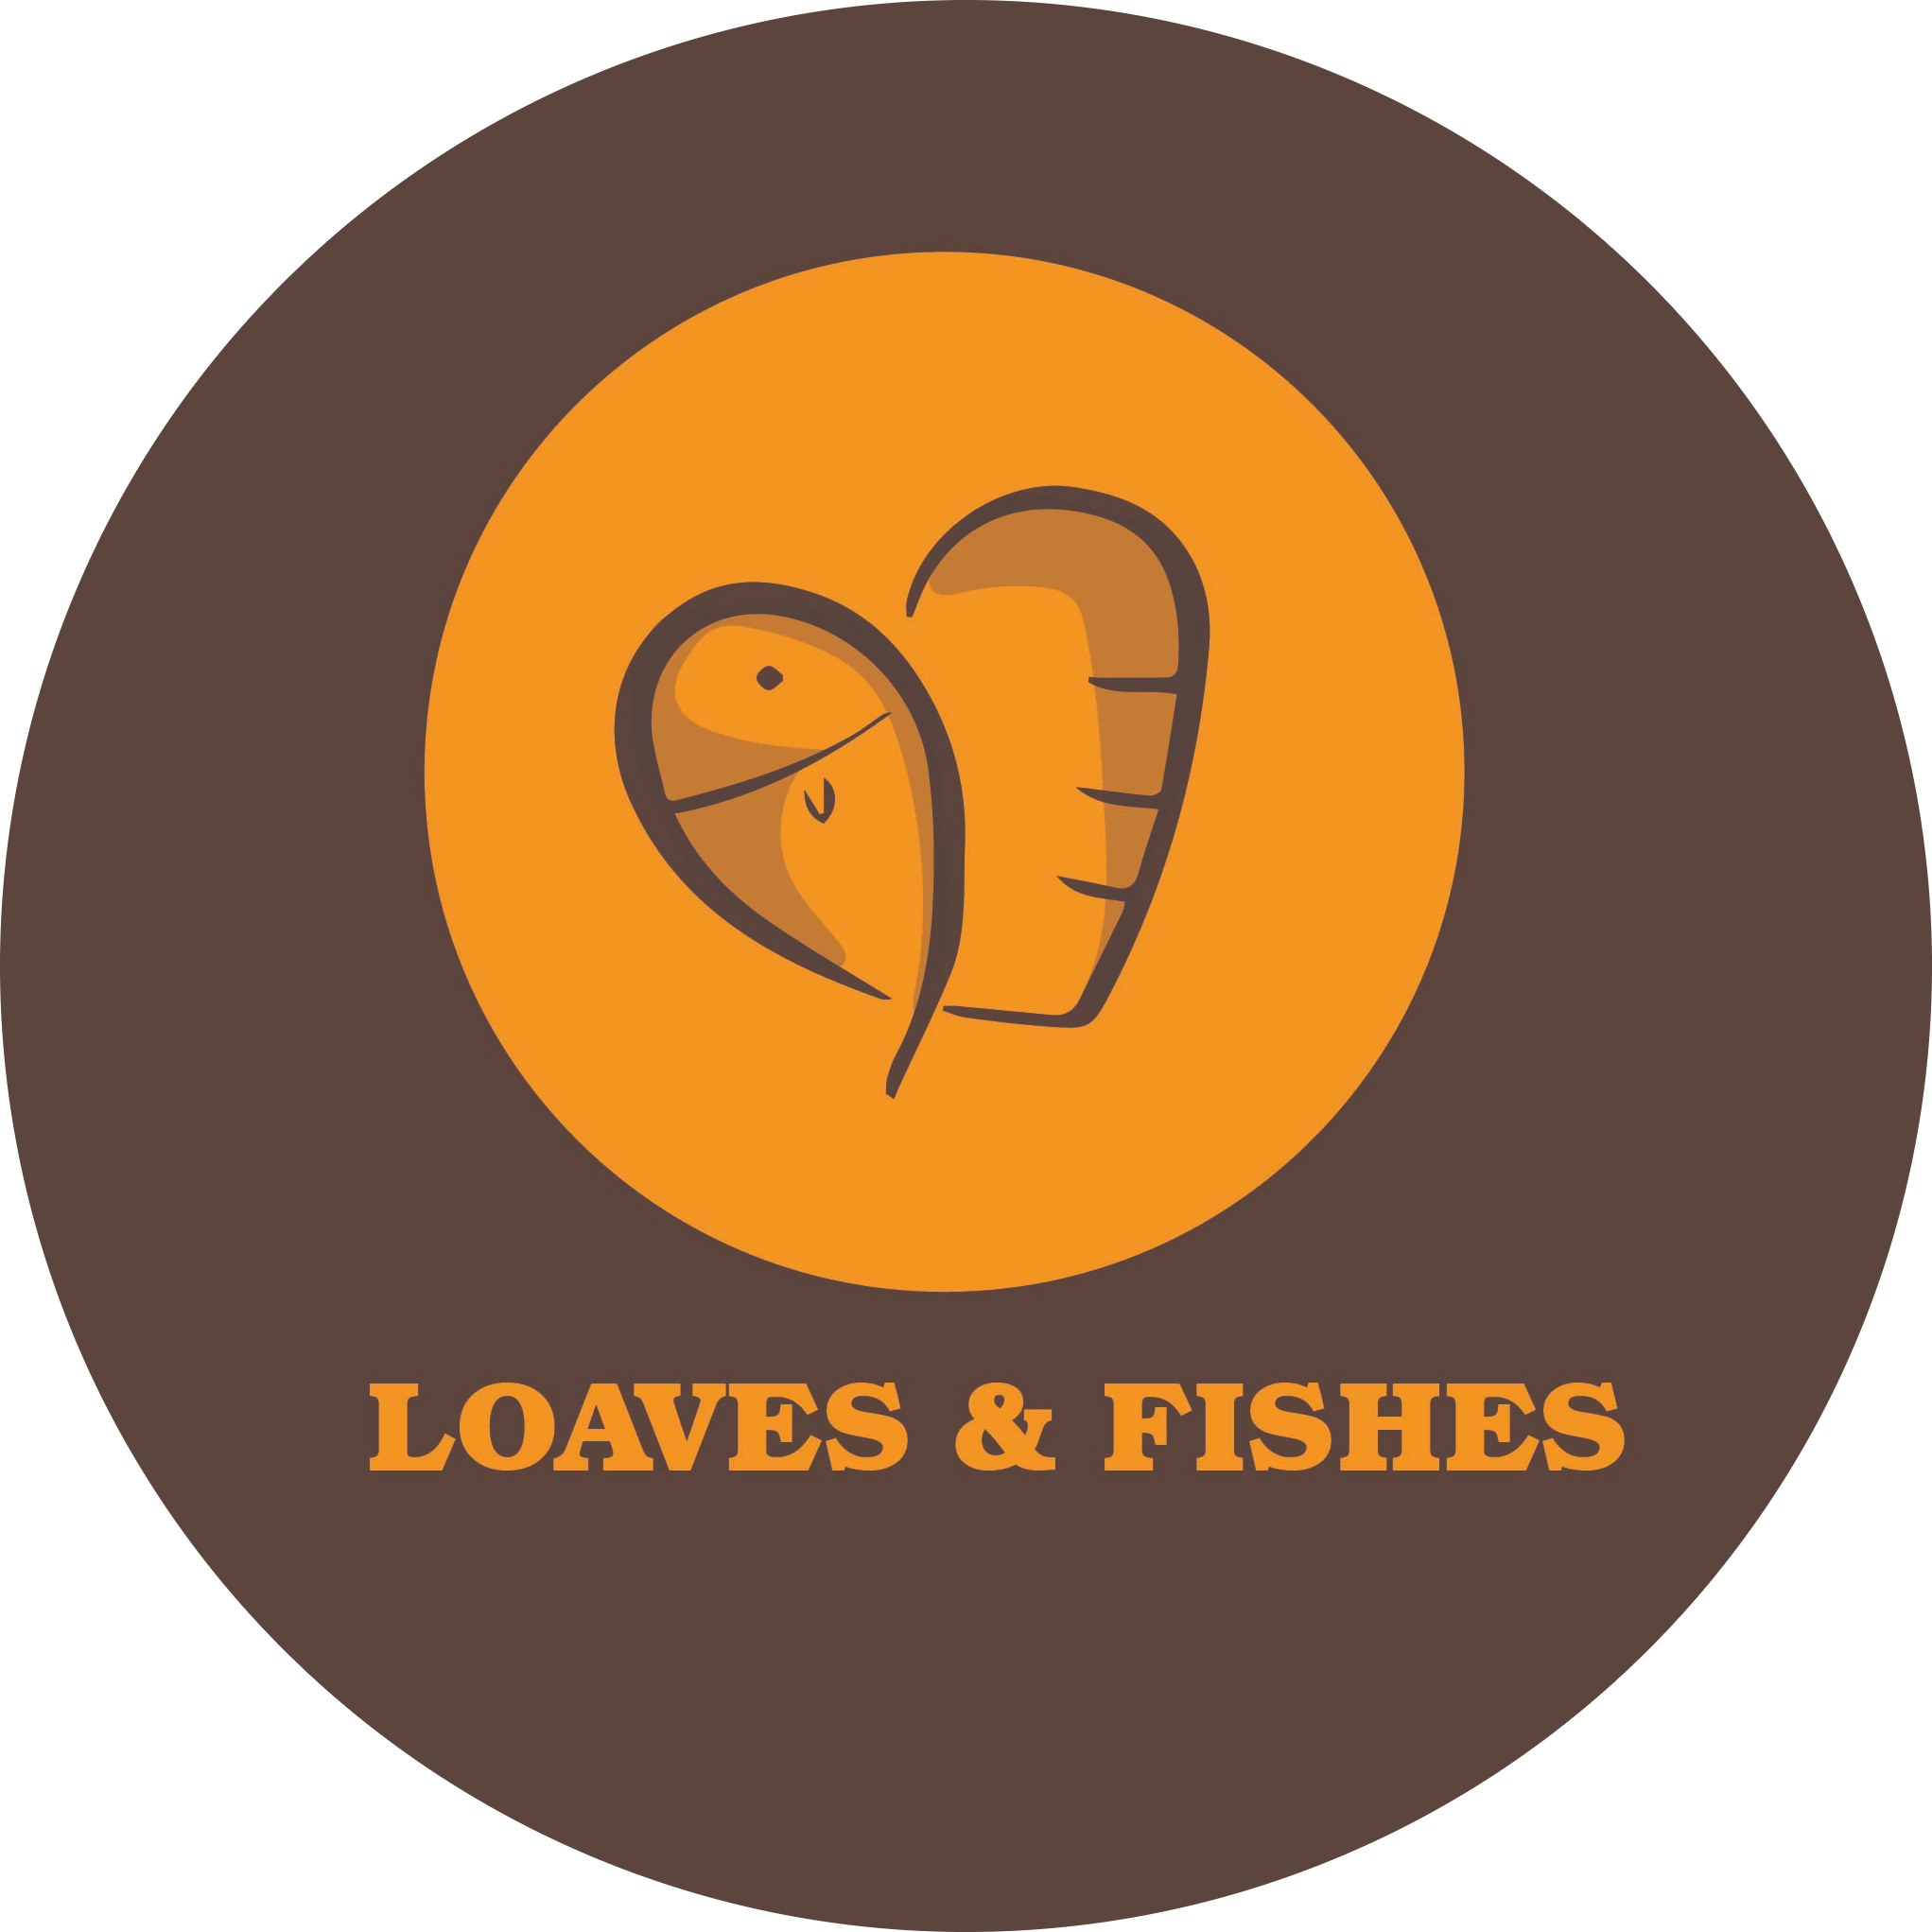 Loaves & Fishes logo